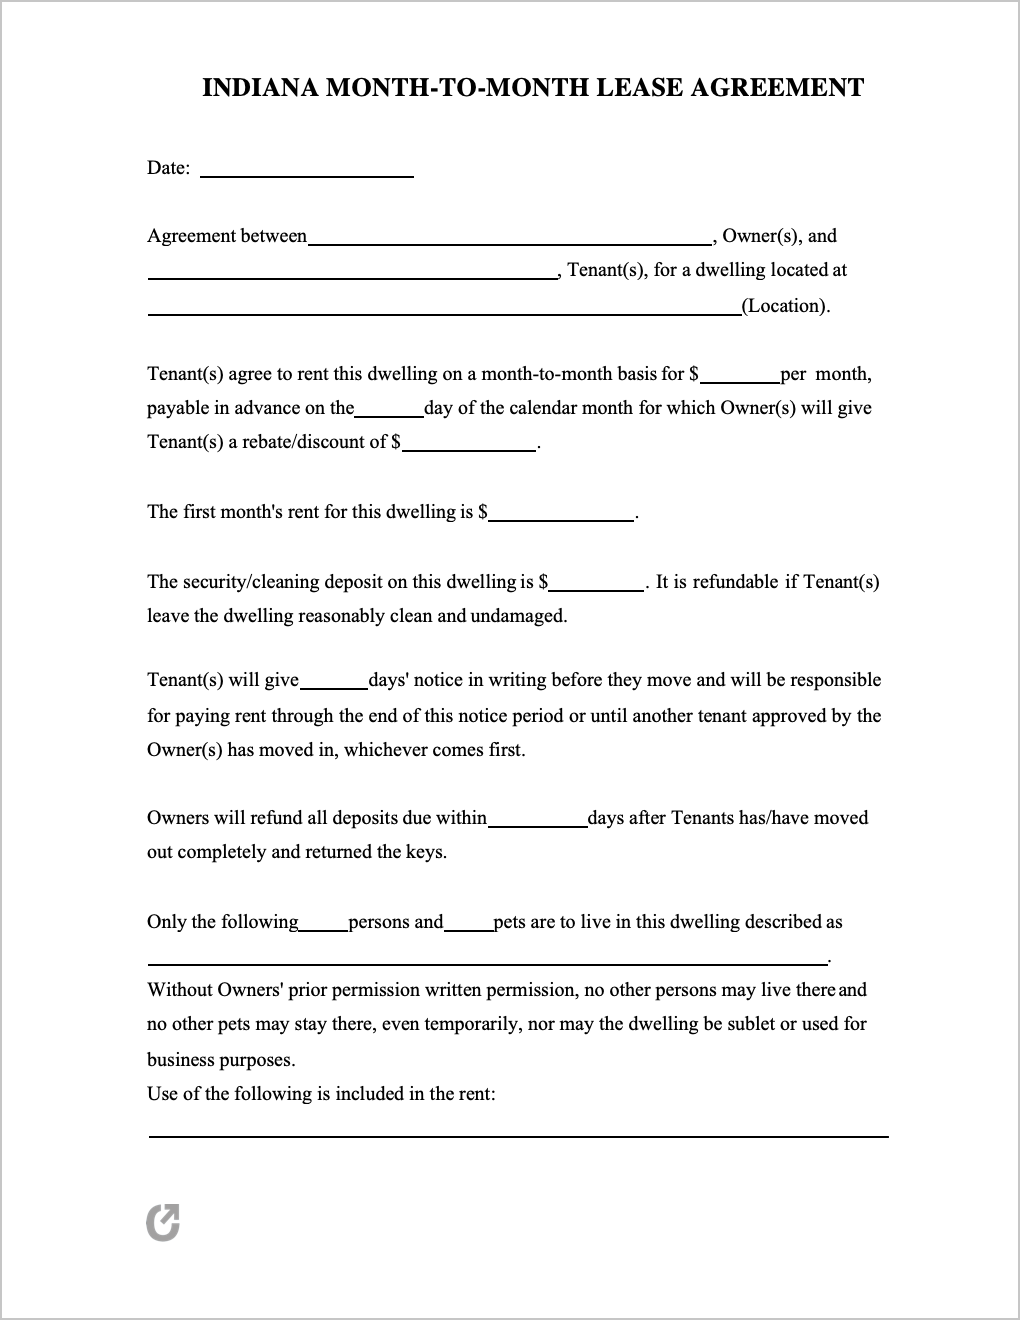 Free Indiana Month to Month Lease Agreement PDF WORD